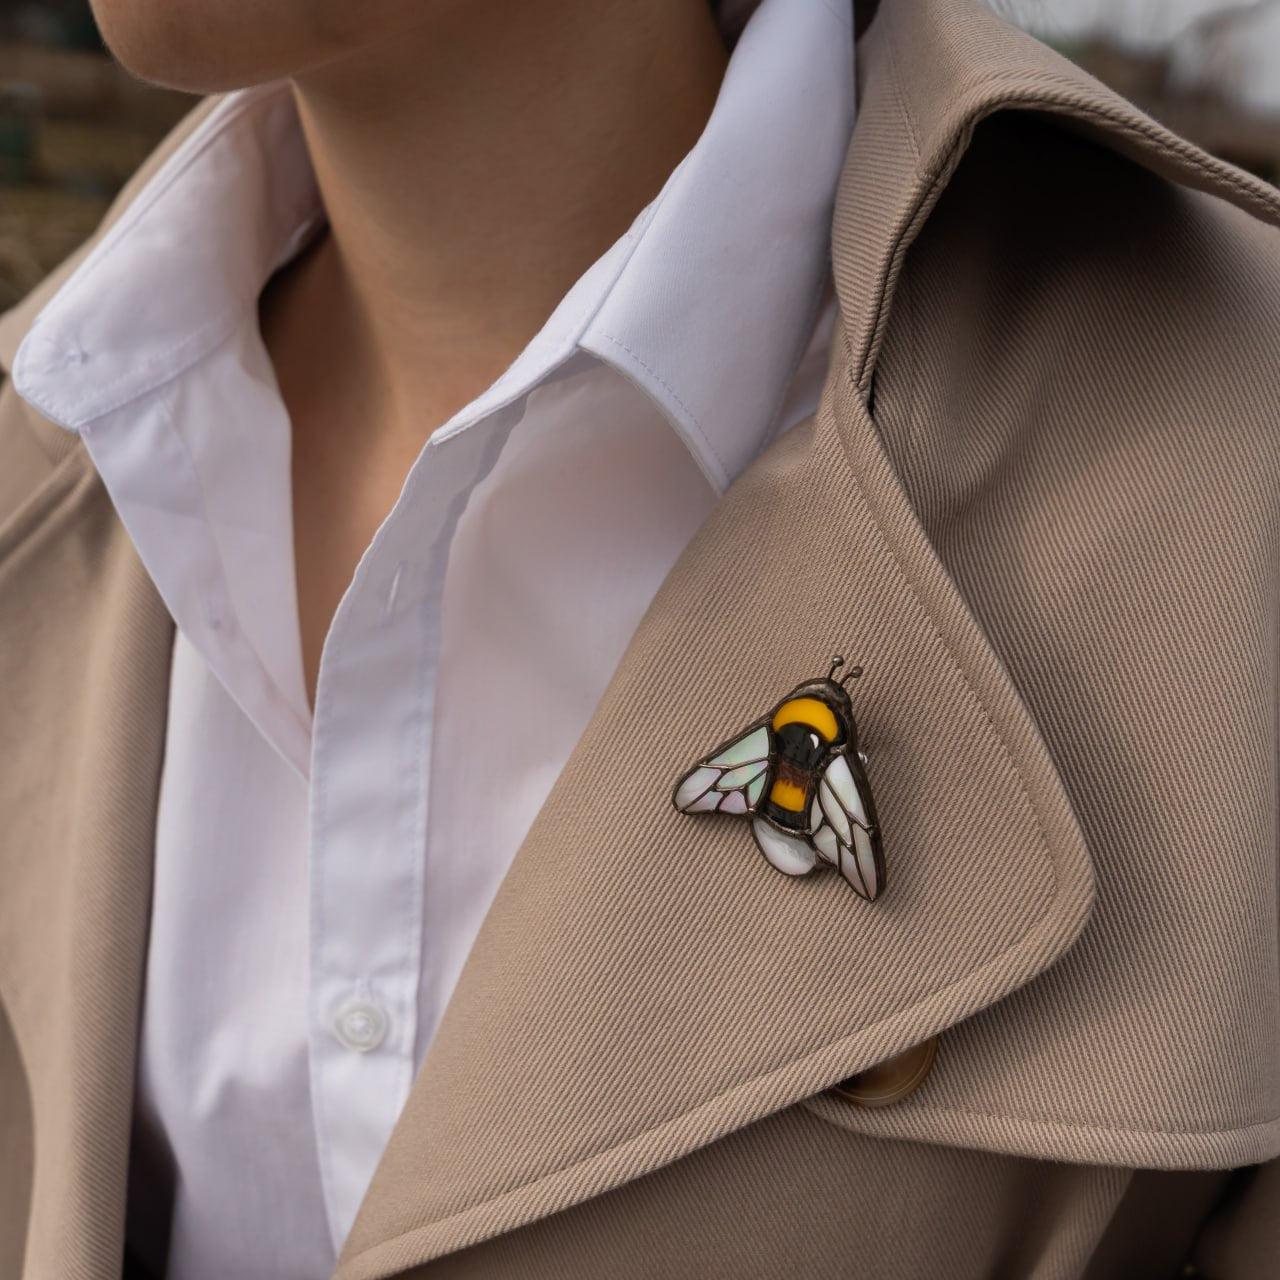 Stained glass bumble bee brooch on a camel coat